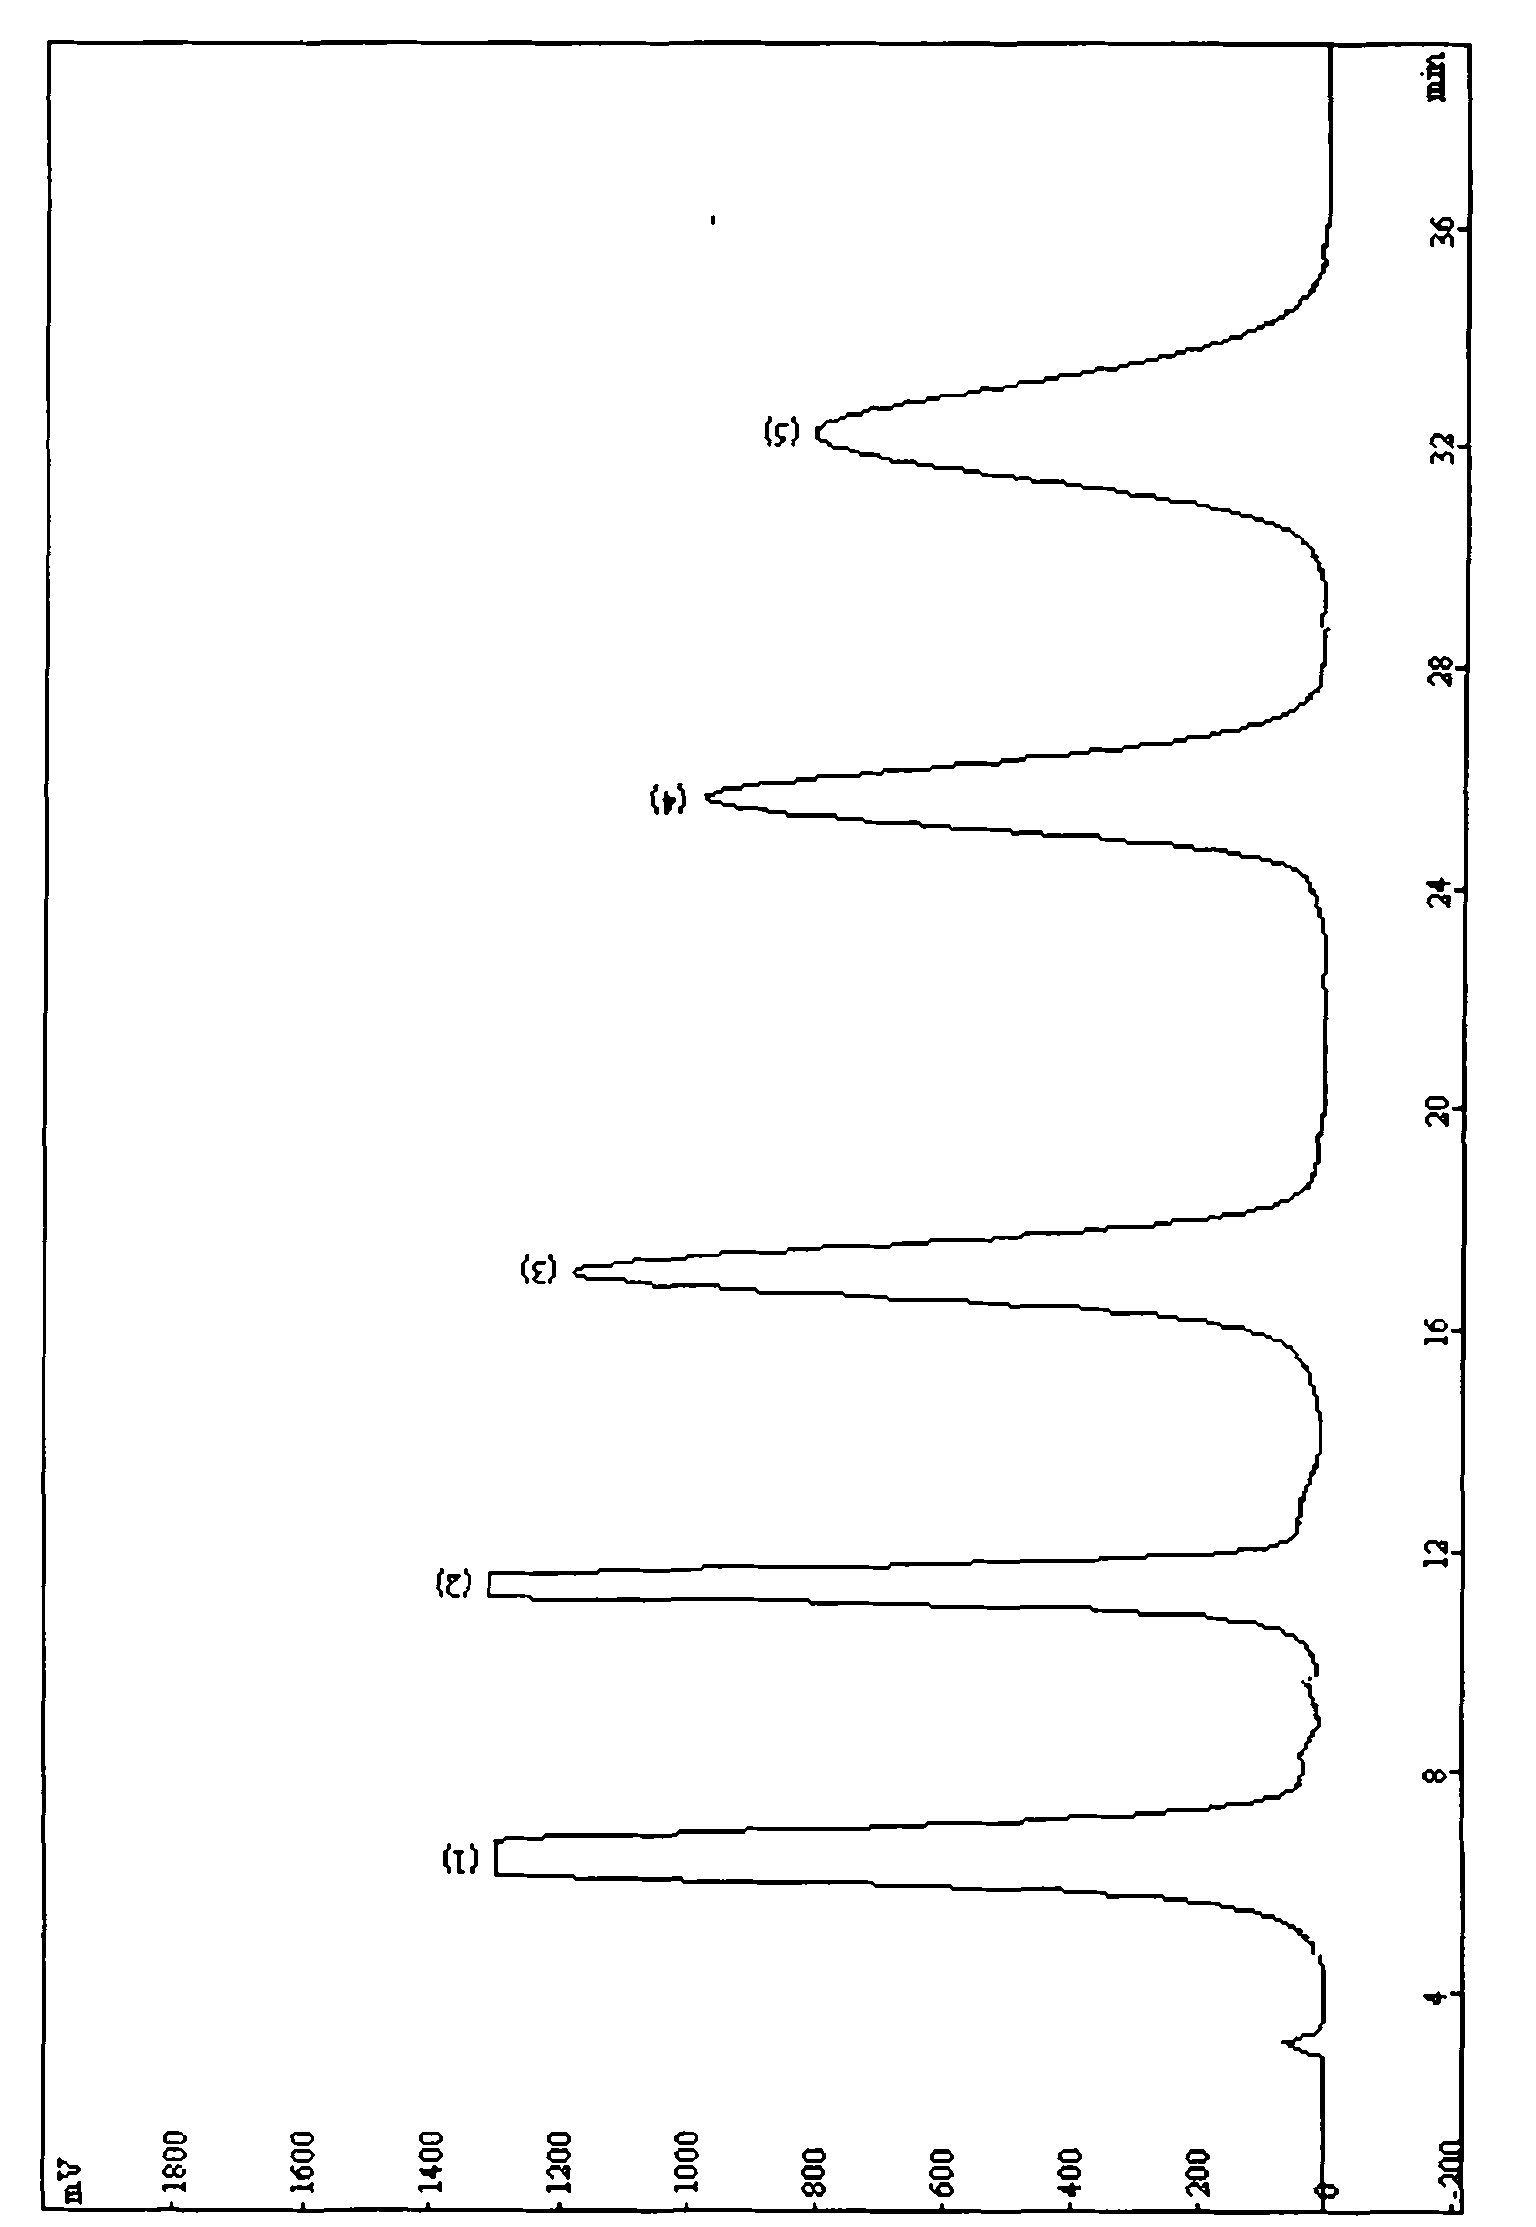 HPLC (High Performance Liquid Chromatography) method for utilizing chiral column to separate, identify and prepare monomer matter from cucurbitacin mixture